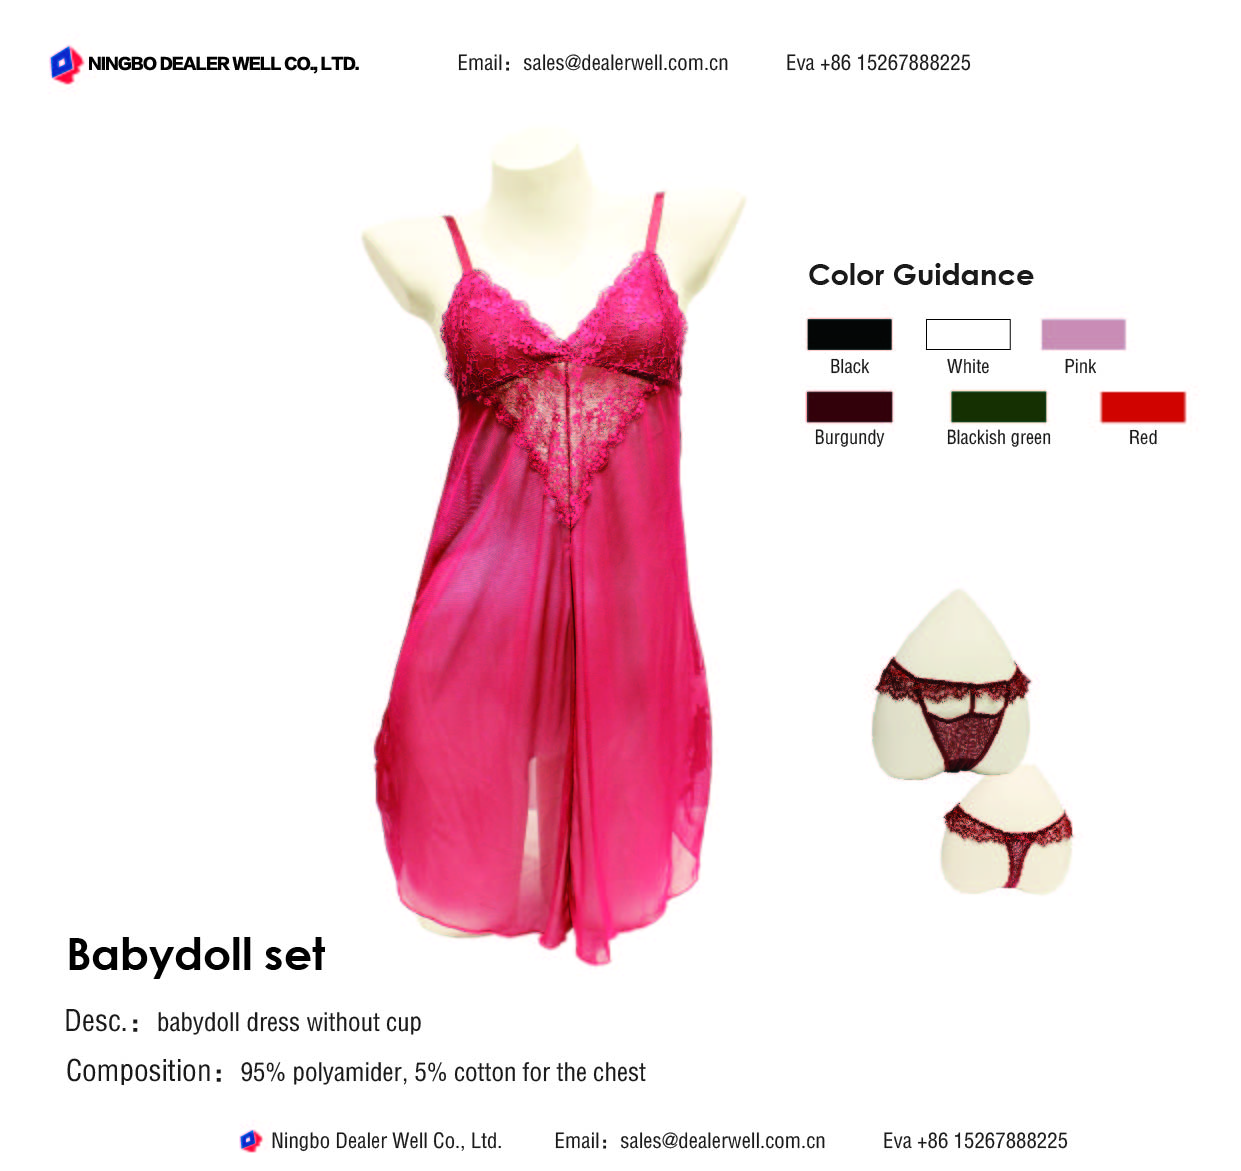 Babydoll dress without cup | Custom babydoll dress without cup | babydoll dress OEM